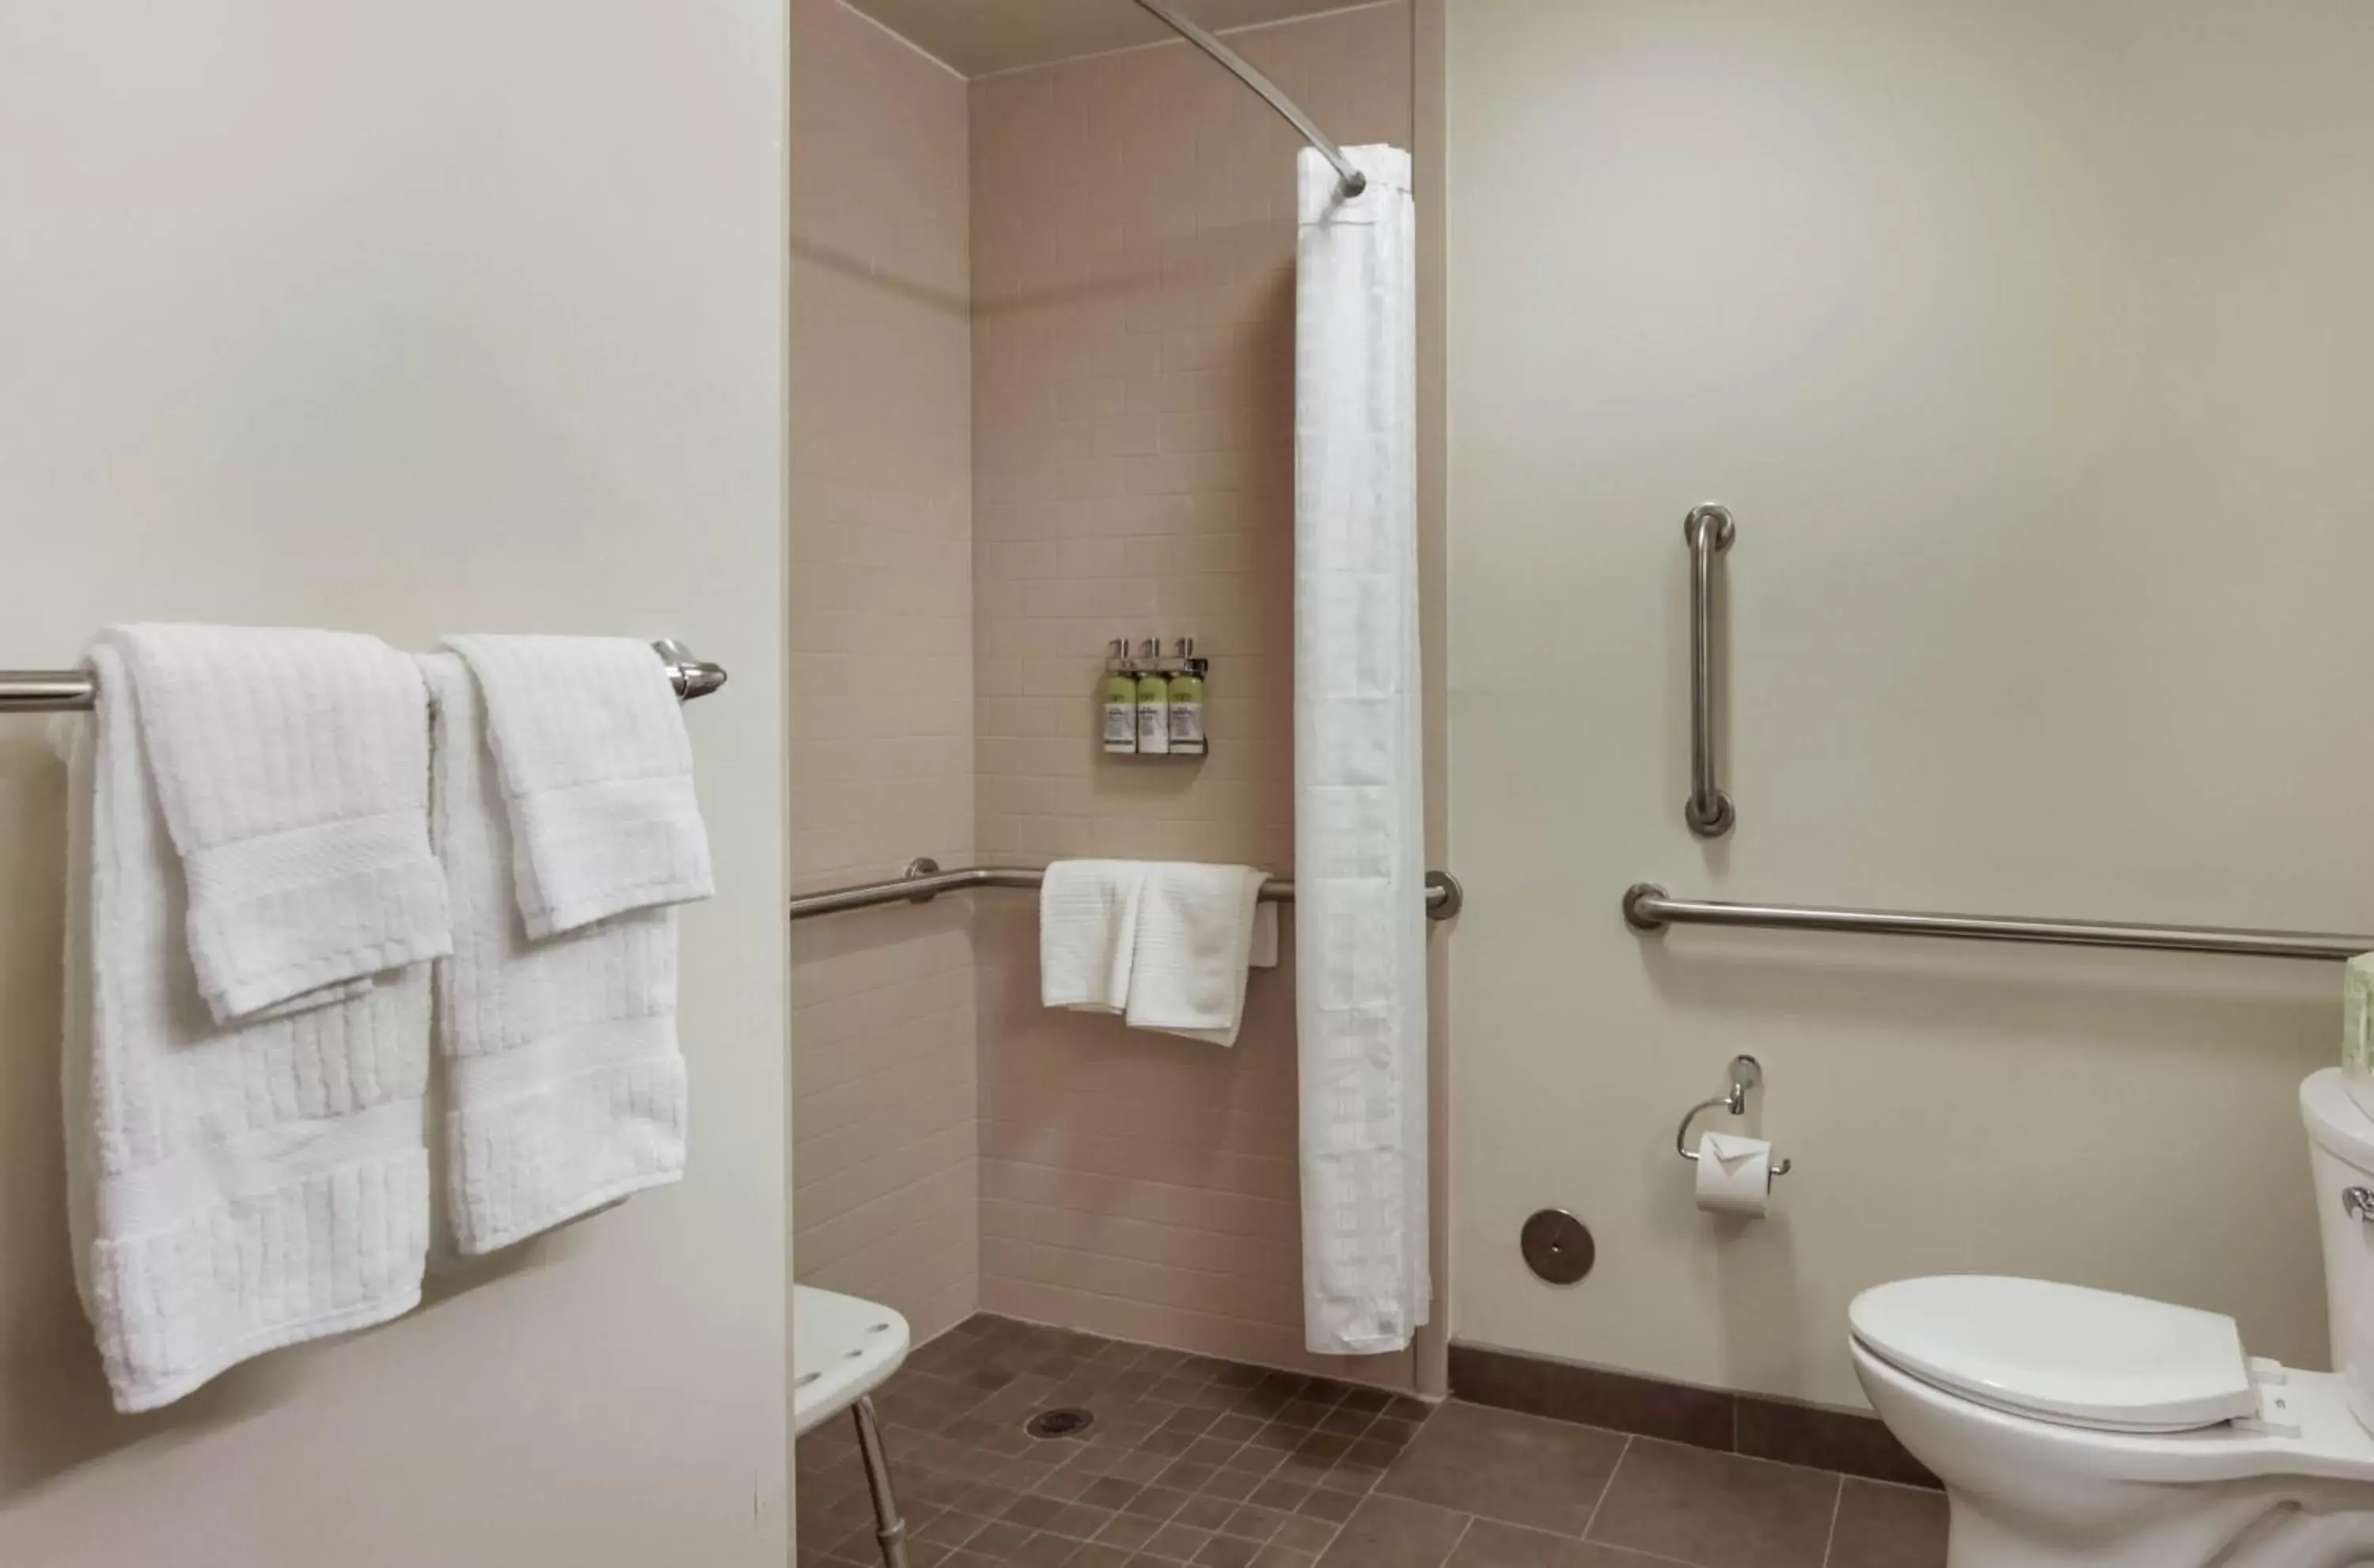 Queen Studio Suite - Mobility Acces Roll in Shower/Non-Smoking in Candlewood Suites - Brighton, an IHG Hotel